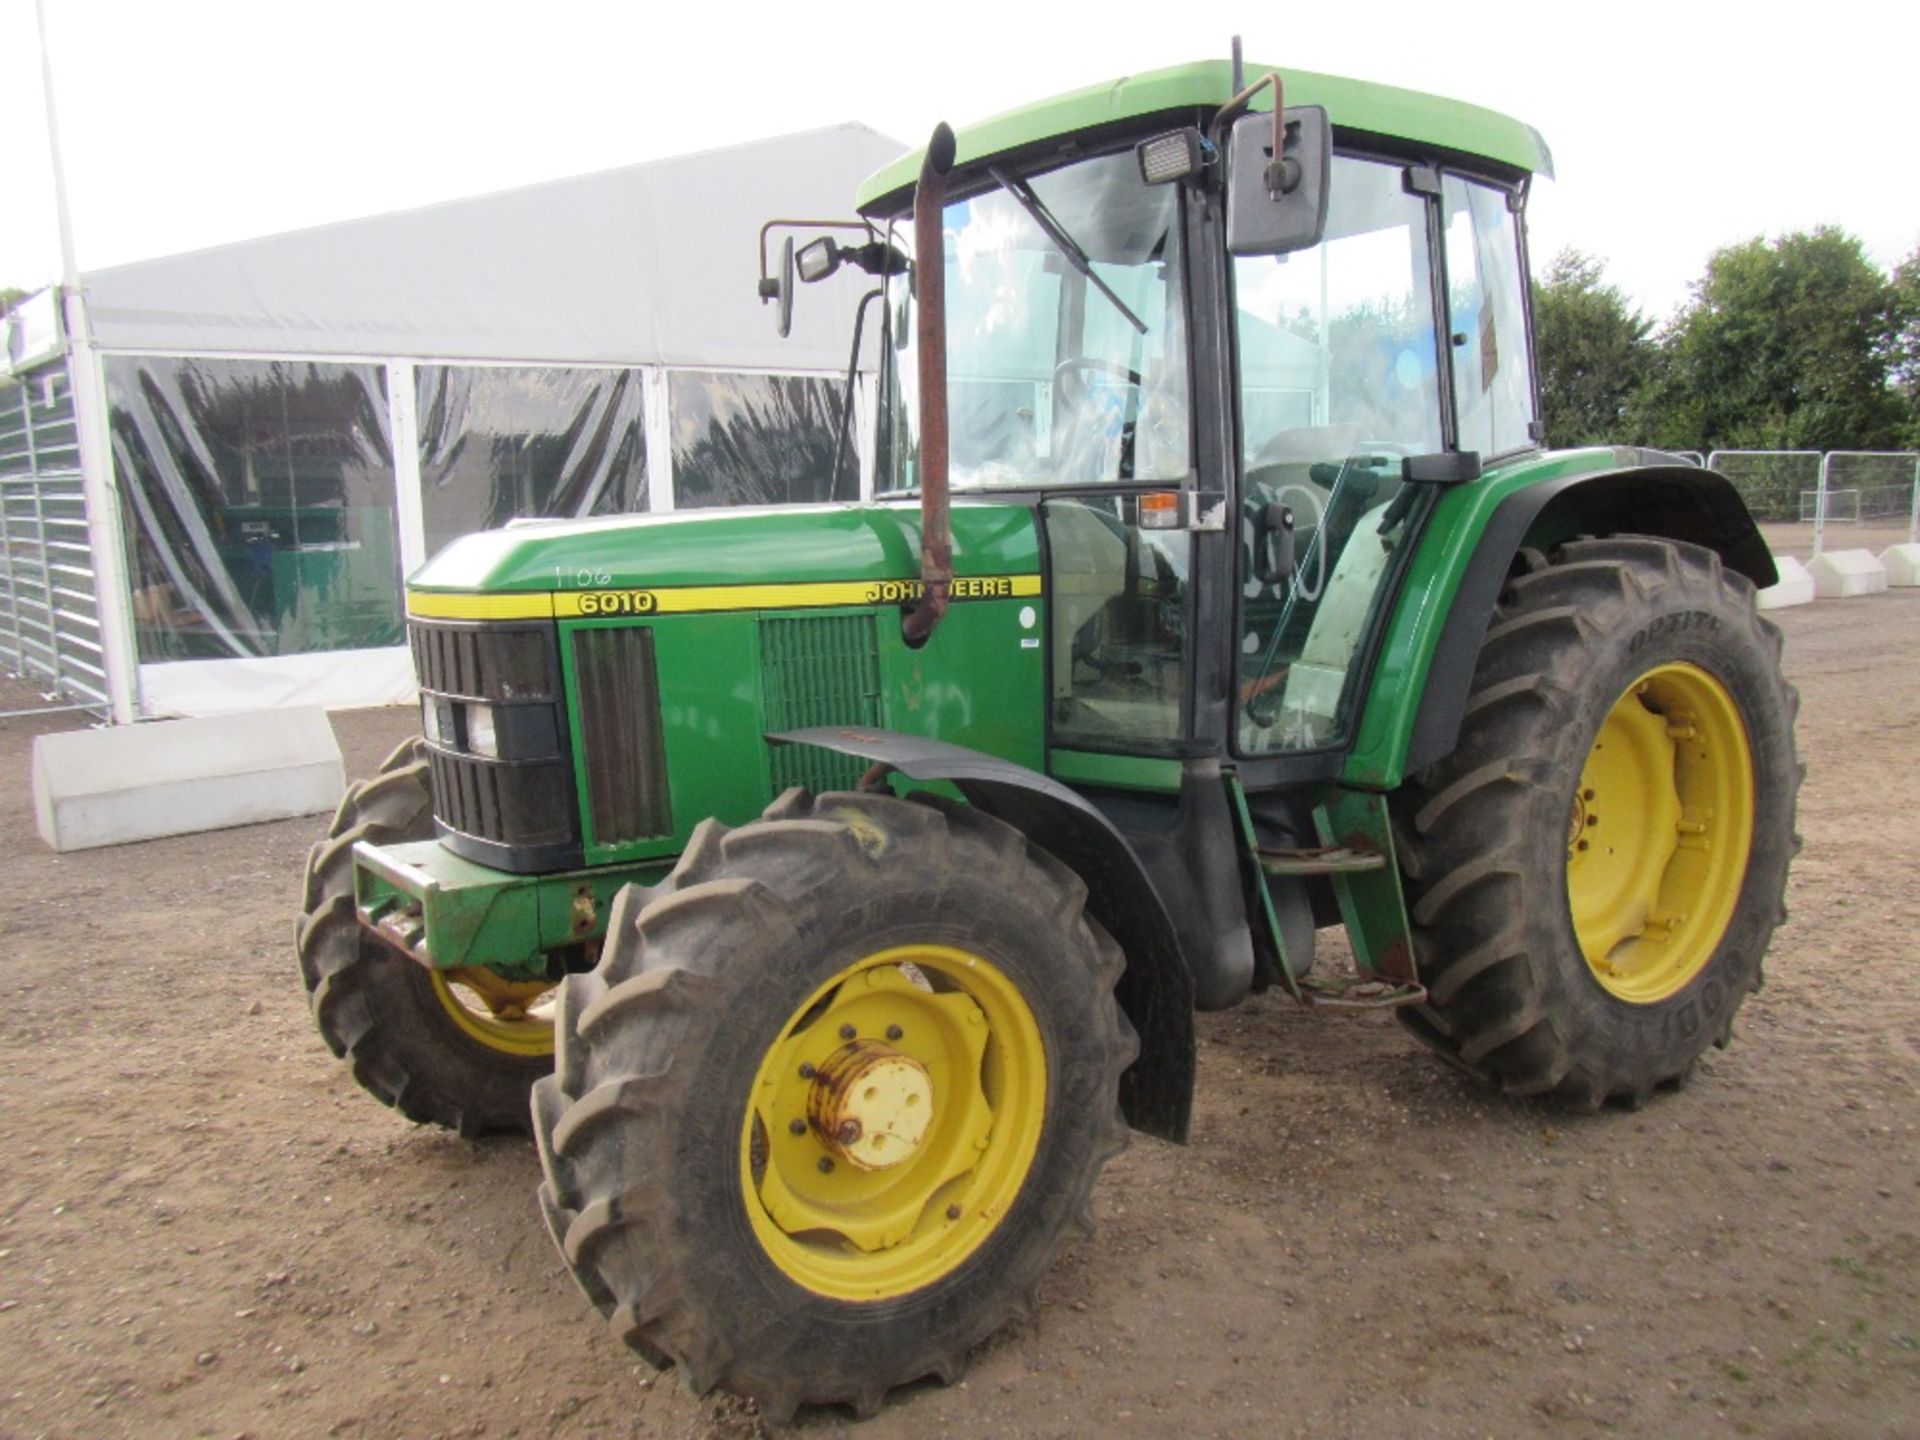 2000 John Deere 6010 4wd Tractor with Air Con & Creeper Gear. From Veg Rig. 4542 hrs. Reg No X153